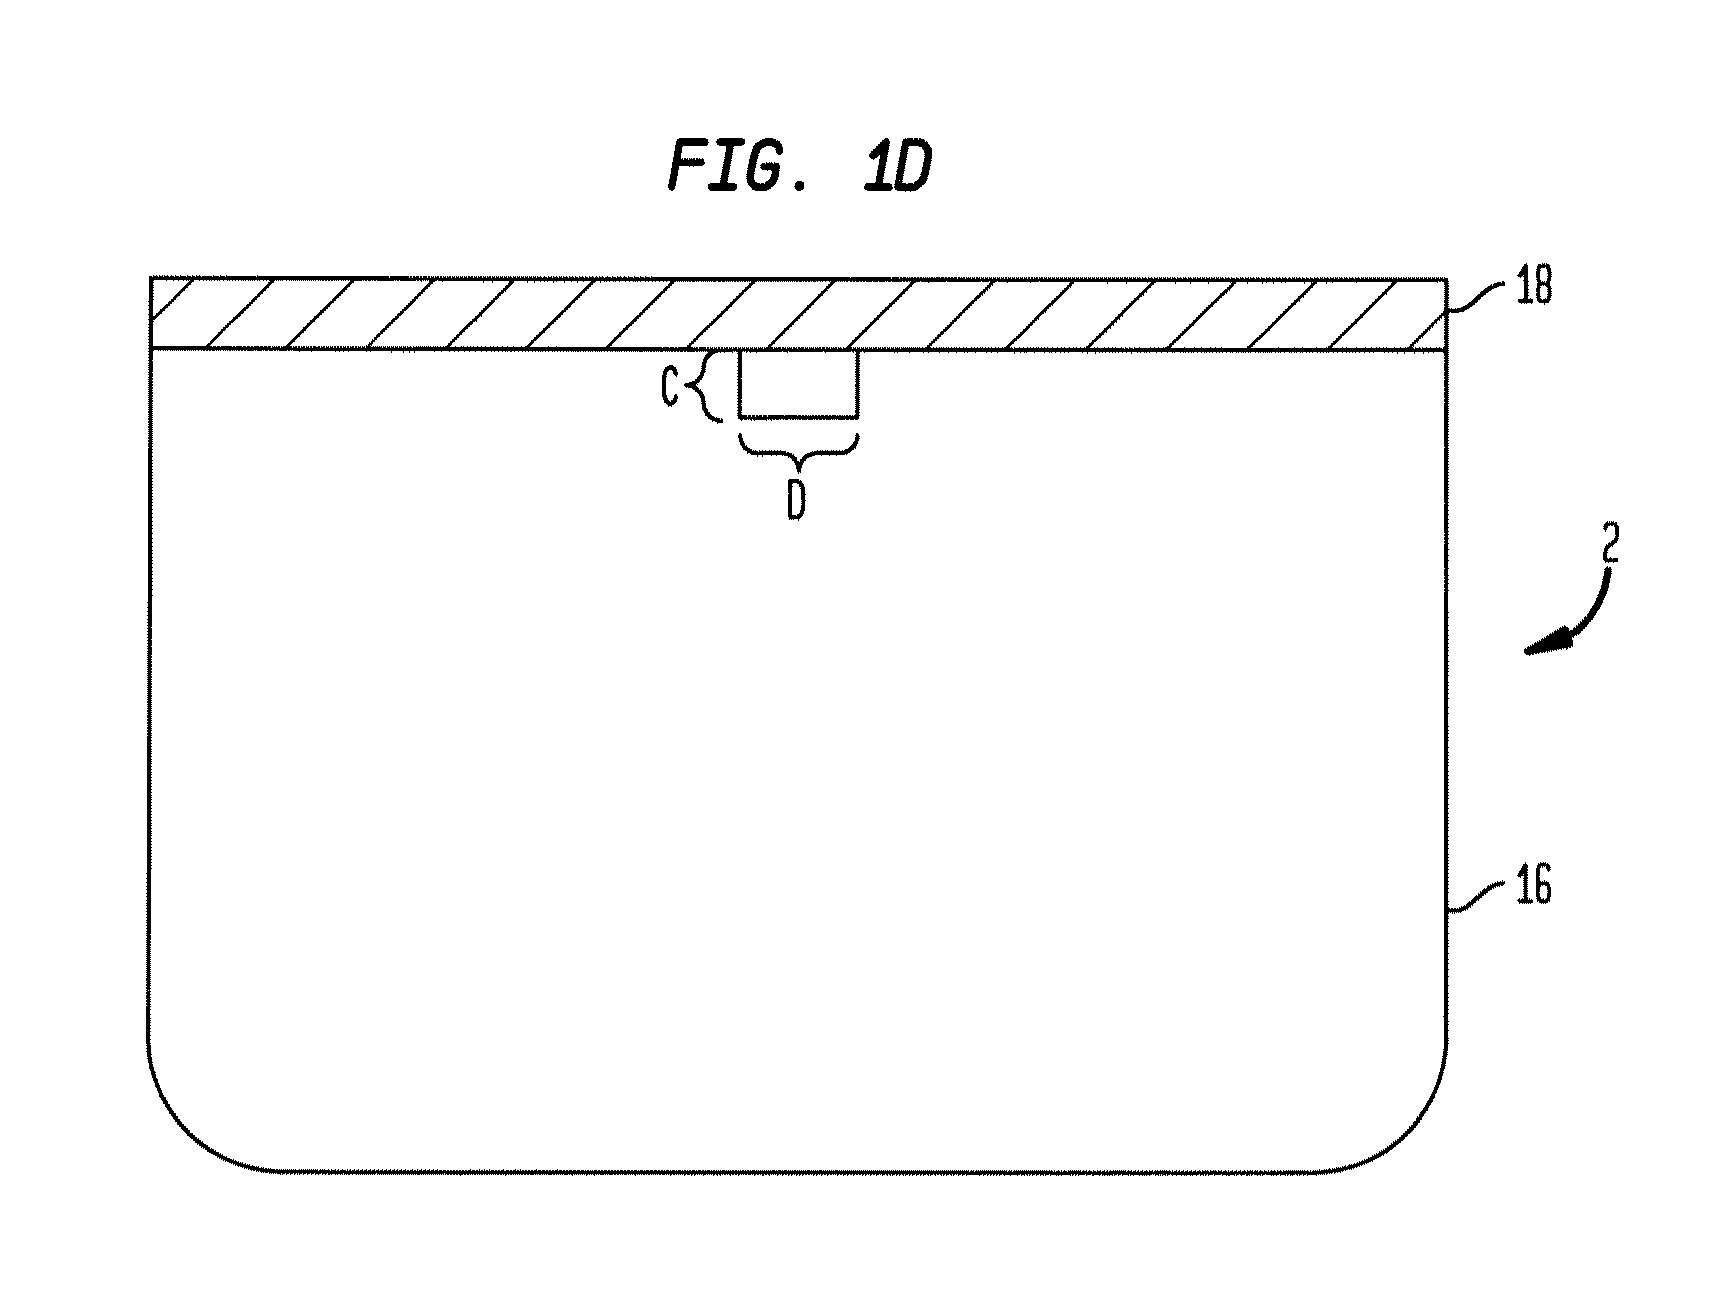 Magnetic bead separation apparatus and method